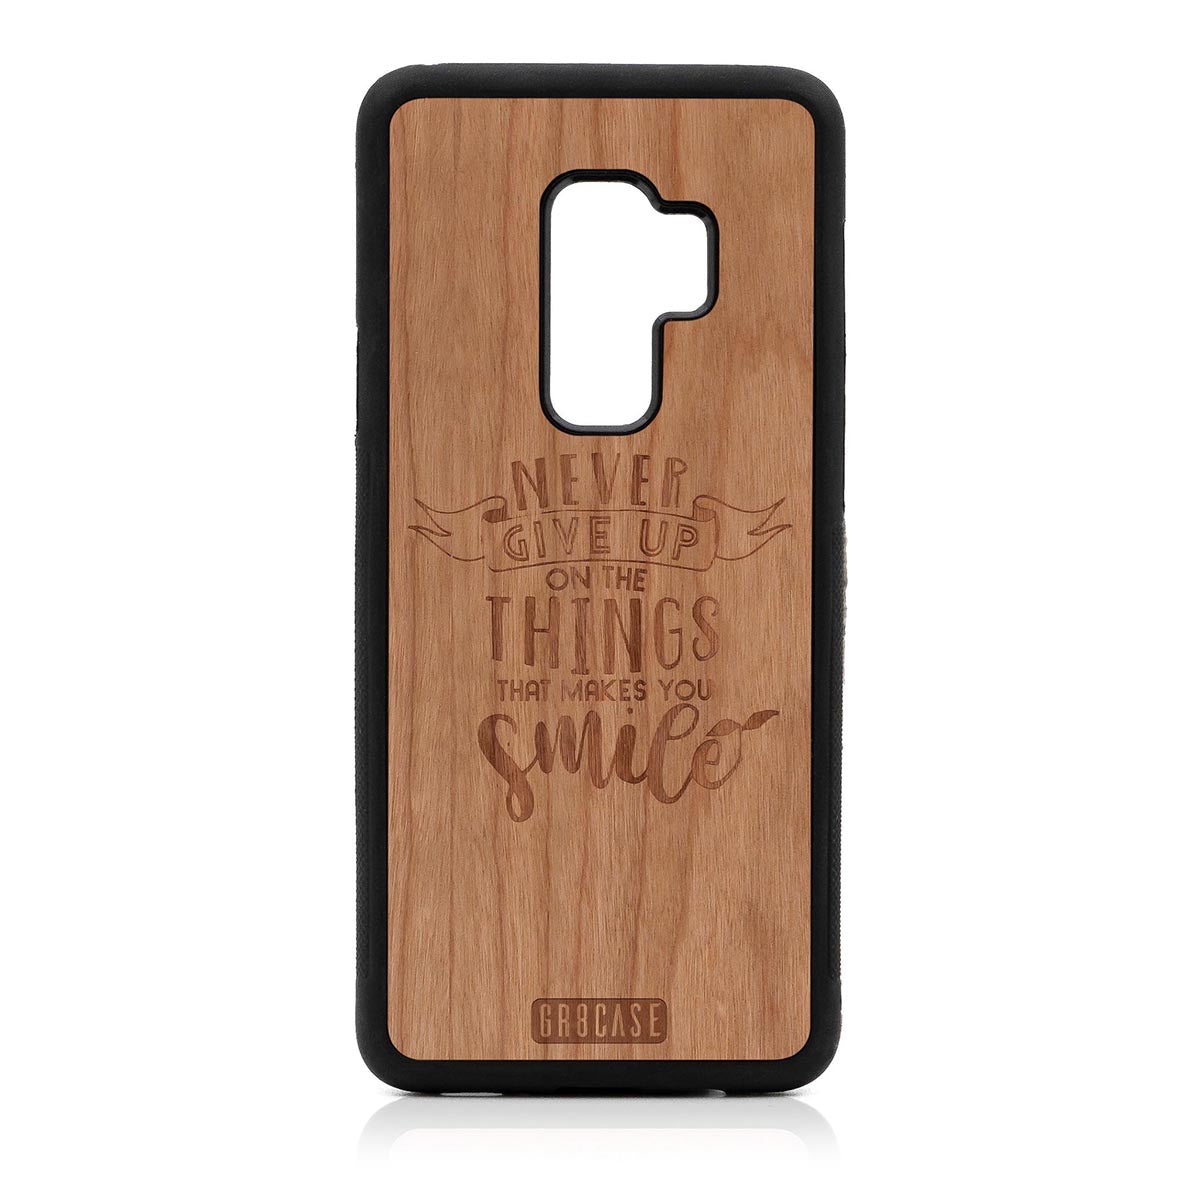 Never Give Up On The Things That Makes You Smile Design Wood Case Samsung Galaxy S9 Plus by GR8CASE